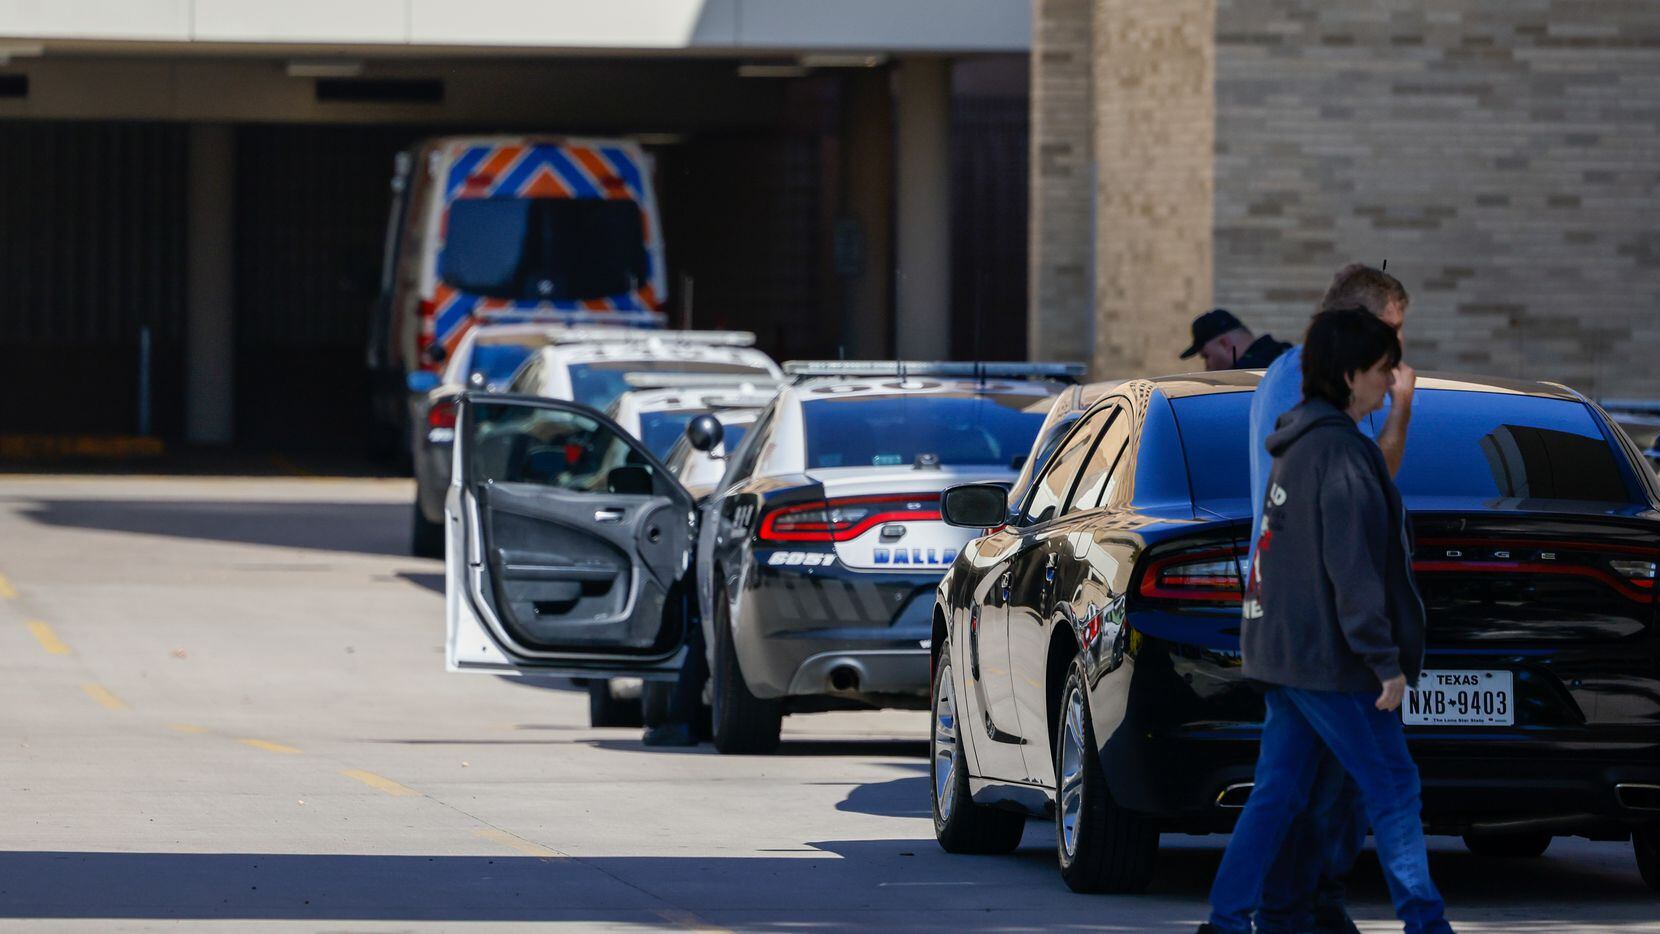 Police said a suspect is in custody after two people were shot at Methodist Dallas Medical...